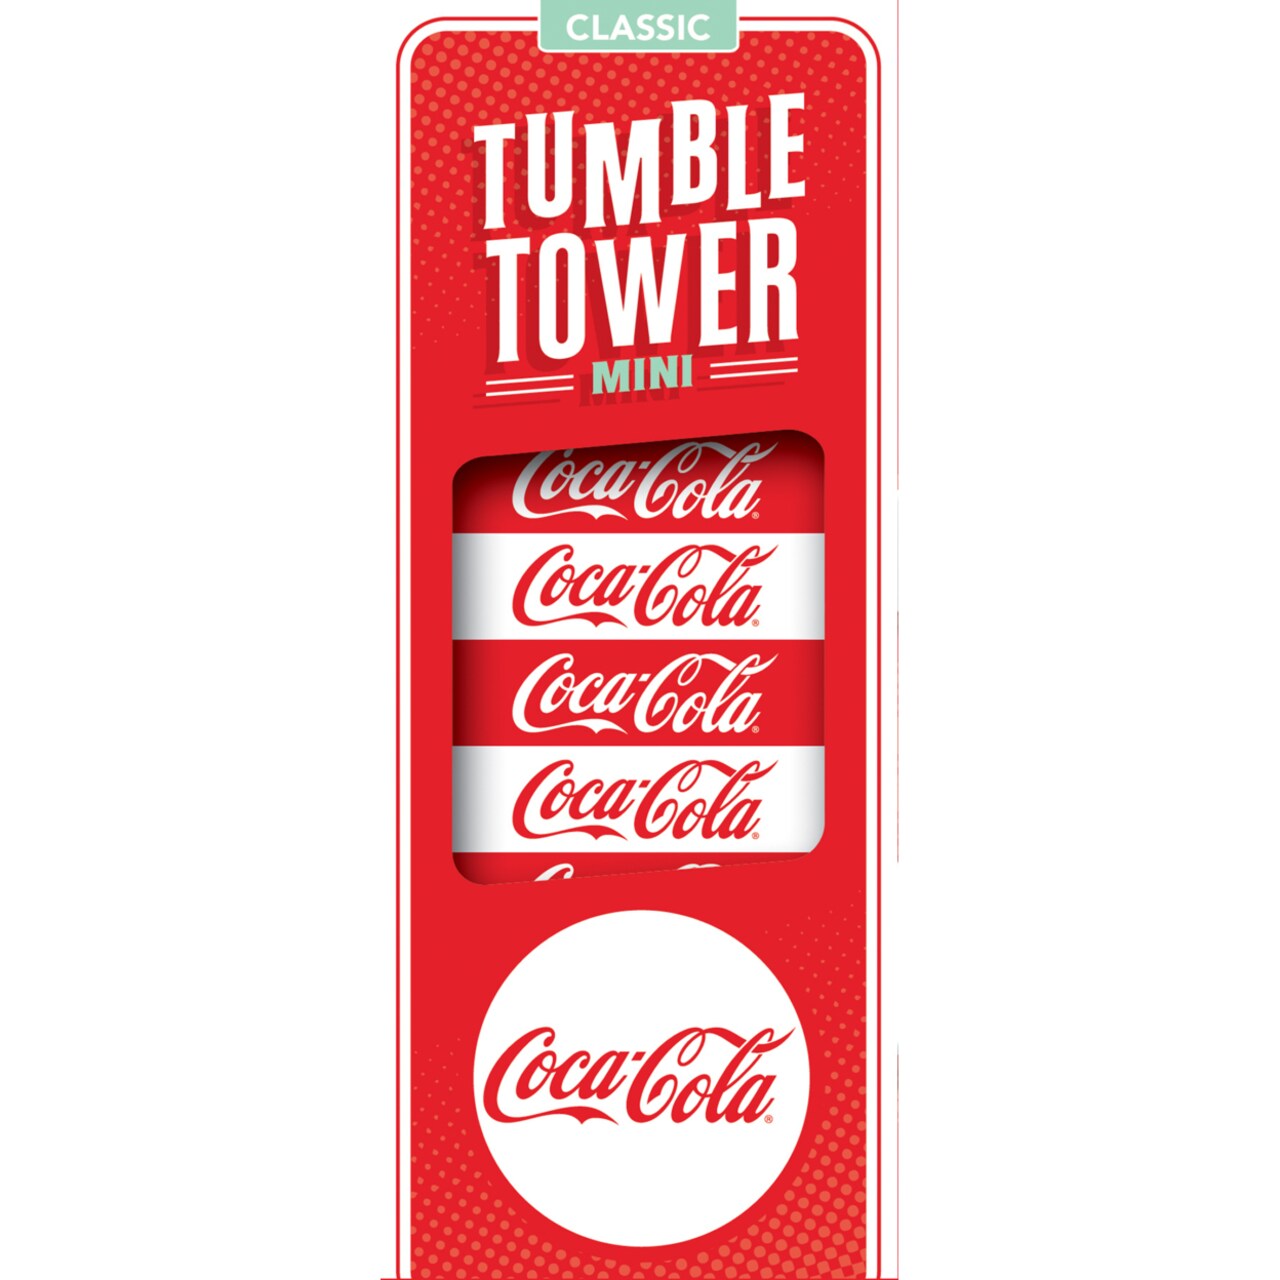 Masterpieces   Games - Coca-Cola Travel Sized Tumble Tower